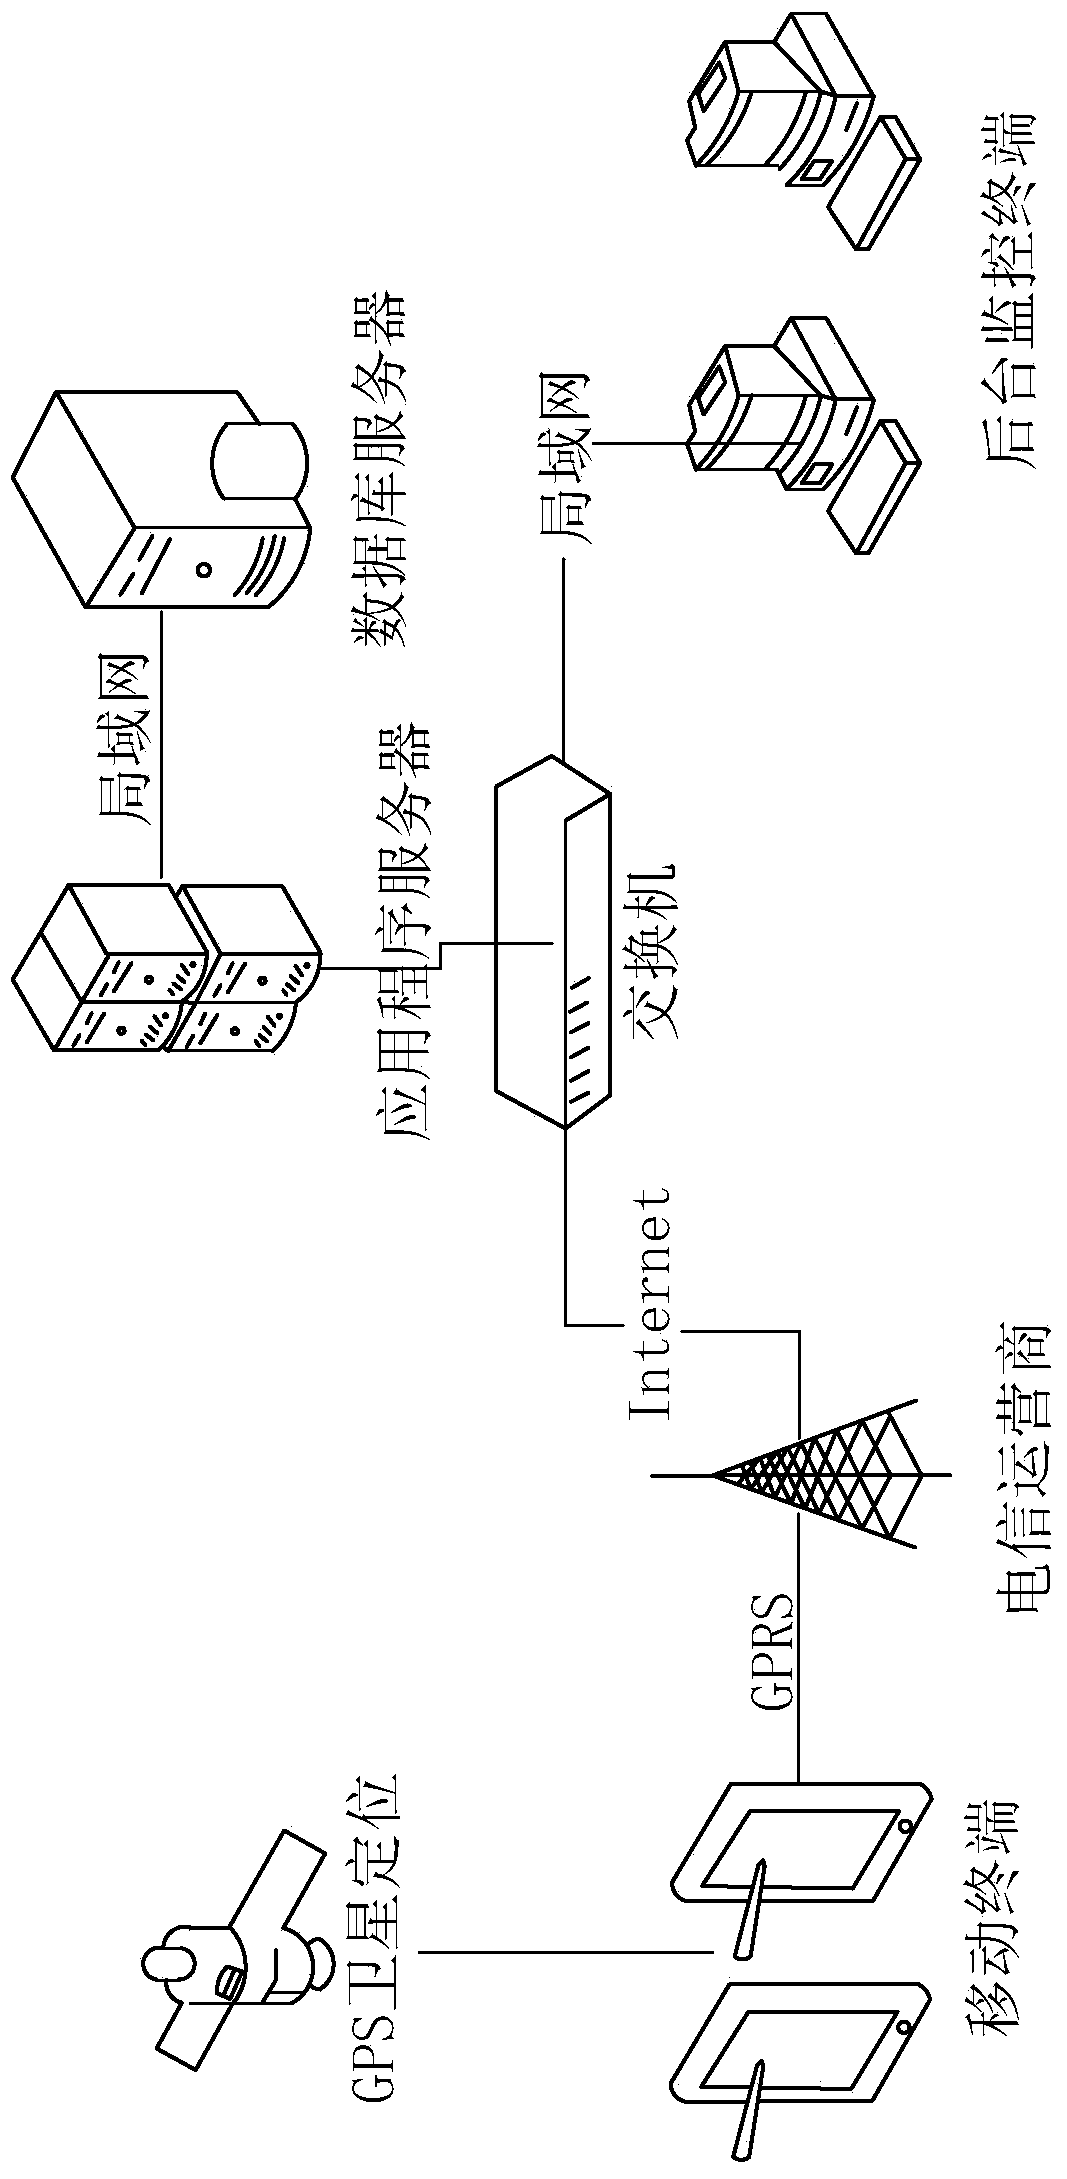 Monitoring system and method for spot inspection and maintenance of mobile machinery